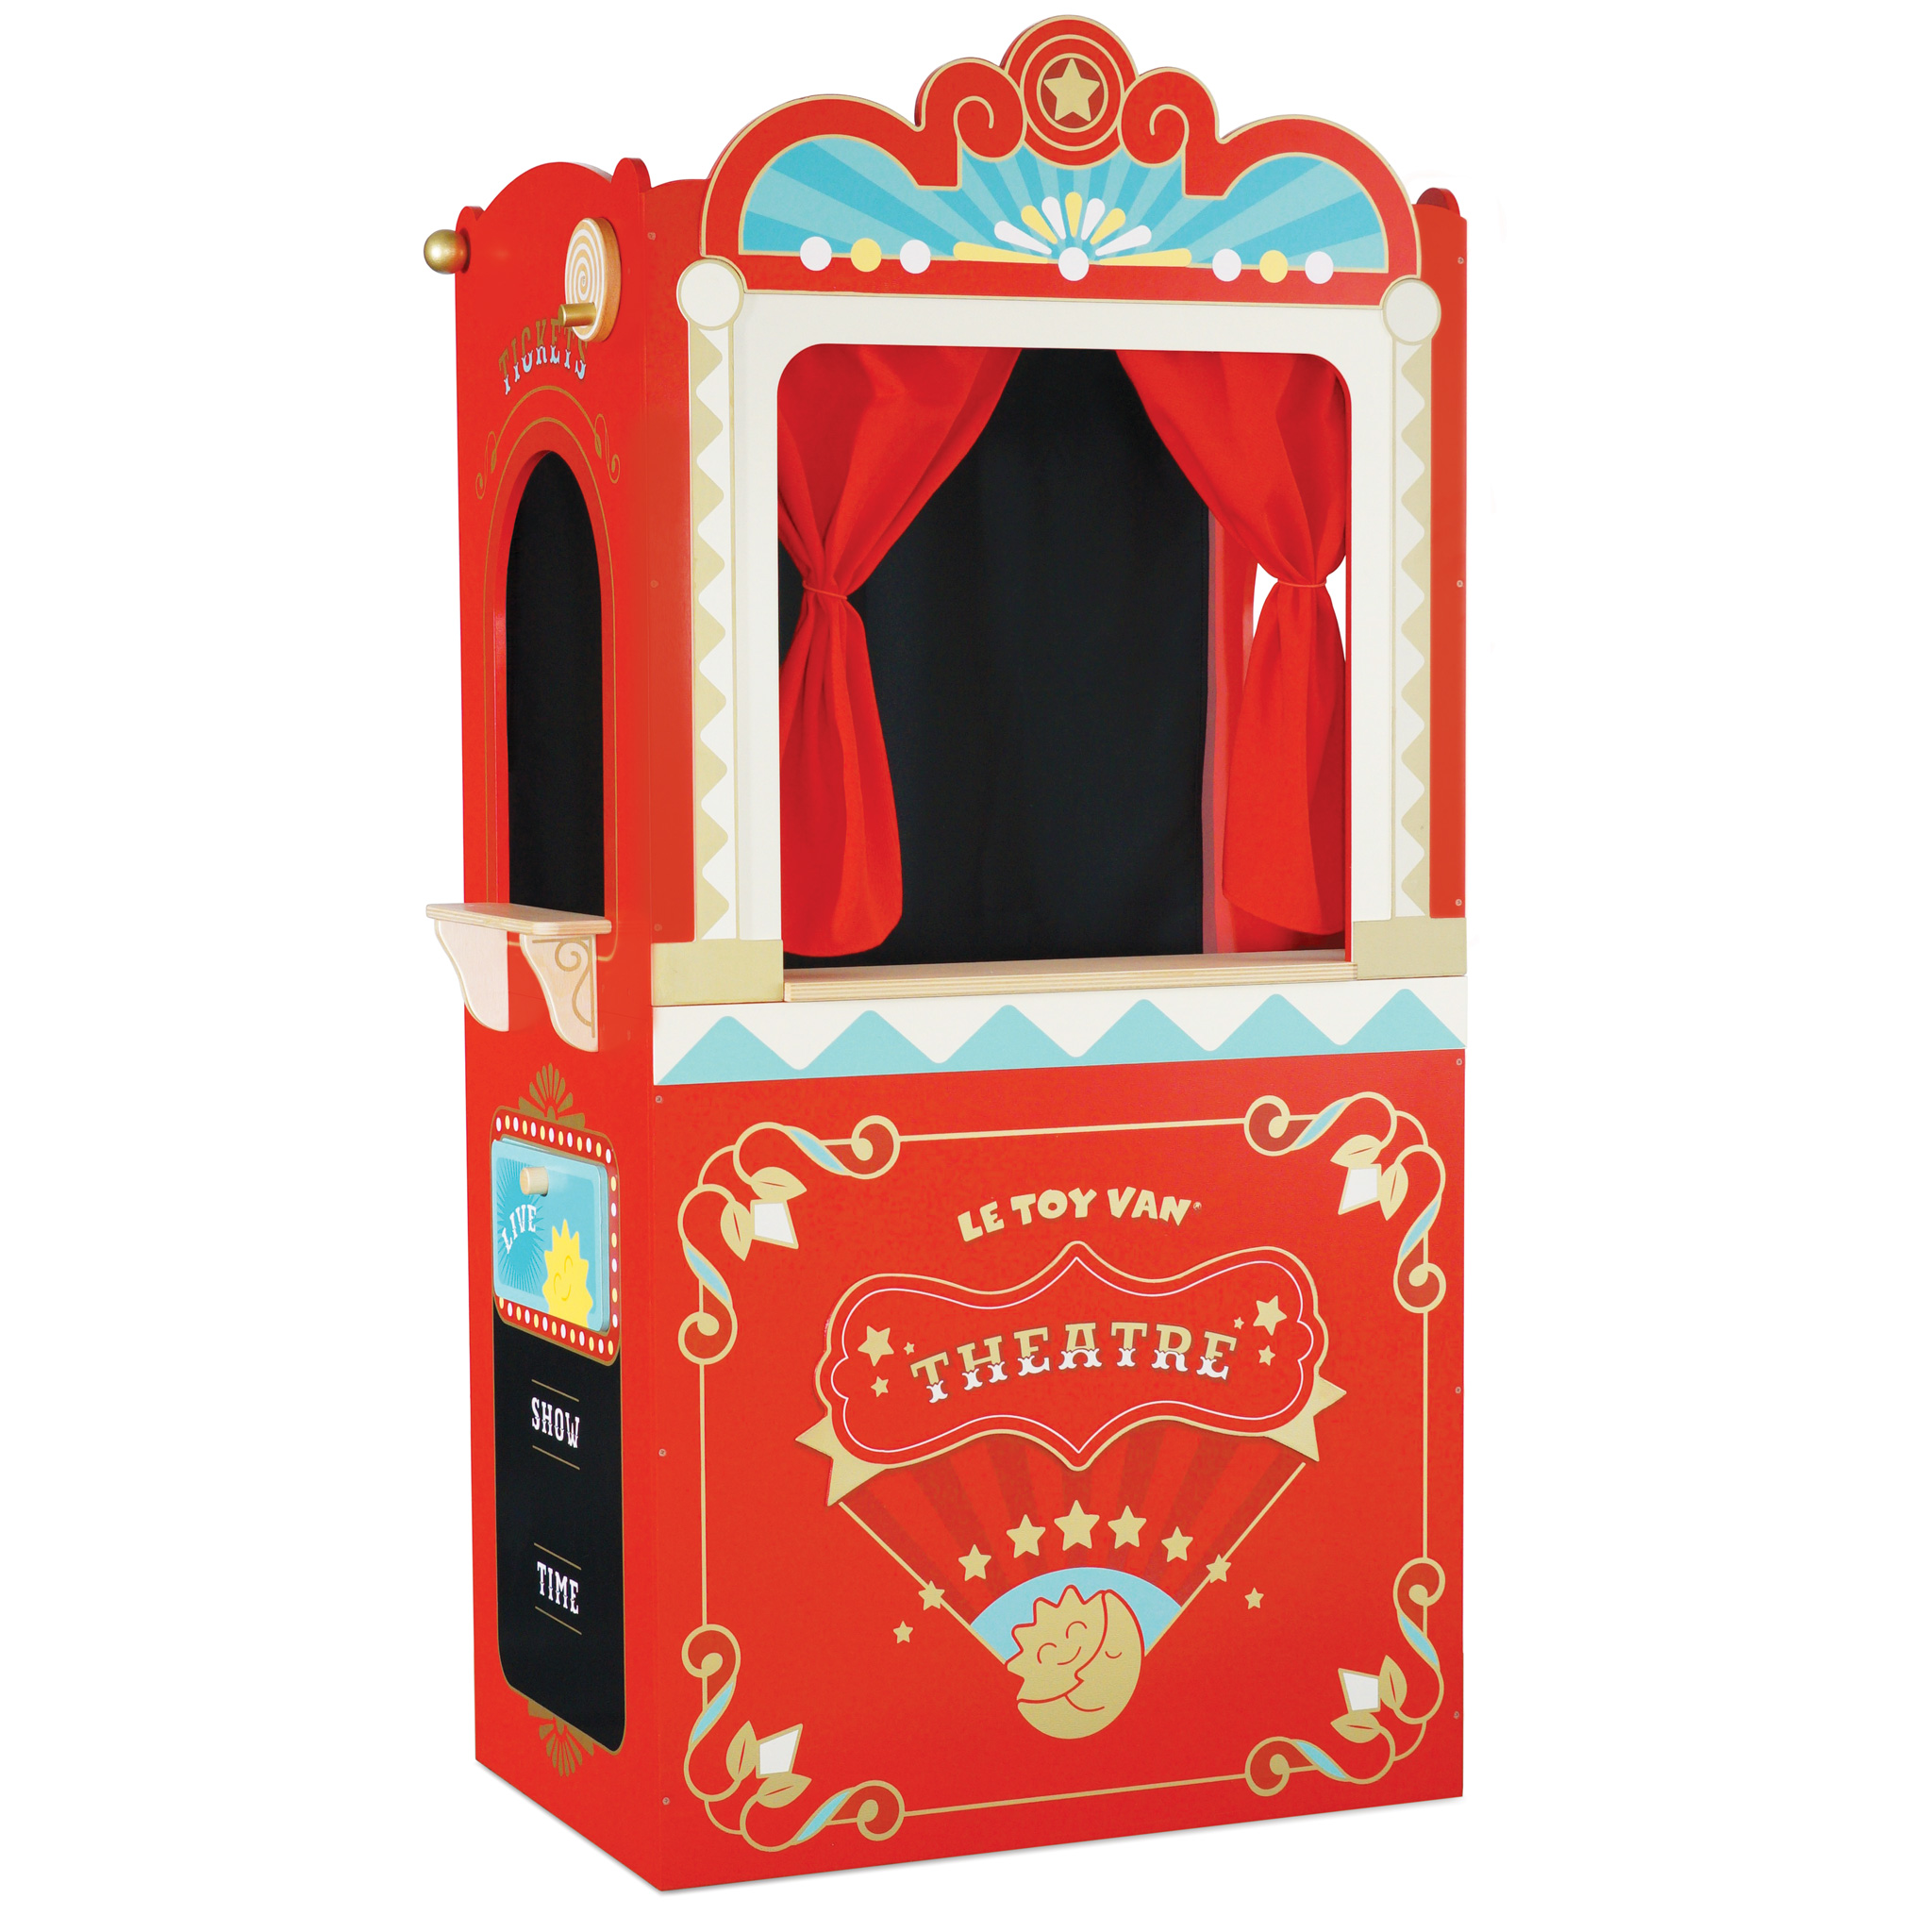 Showtime Puppentheater / Showtime Puppet Theatre - 2021